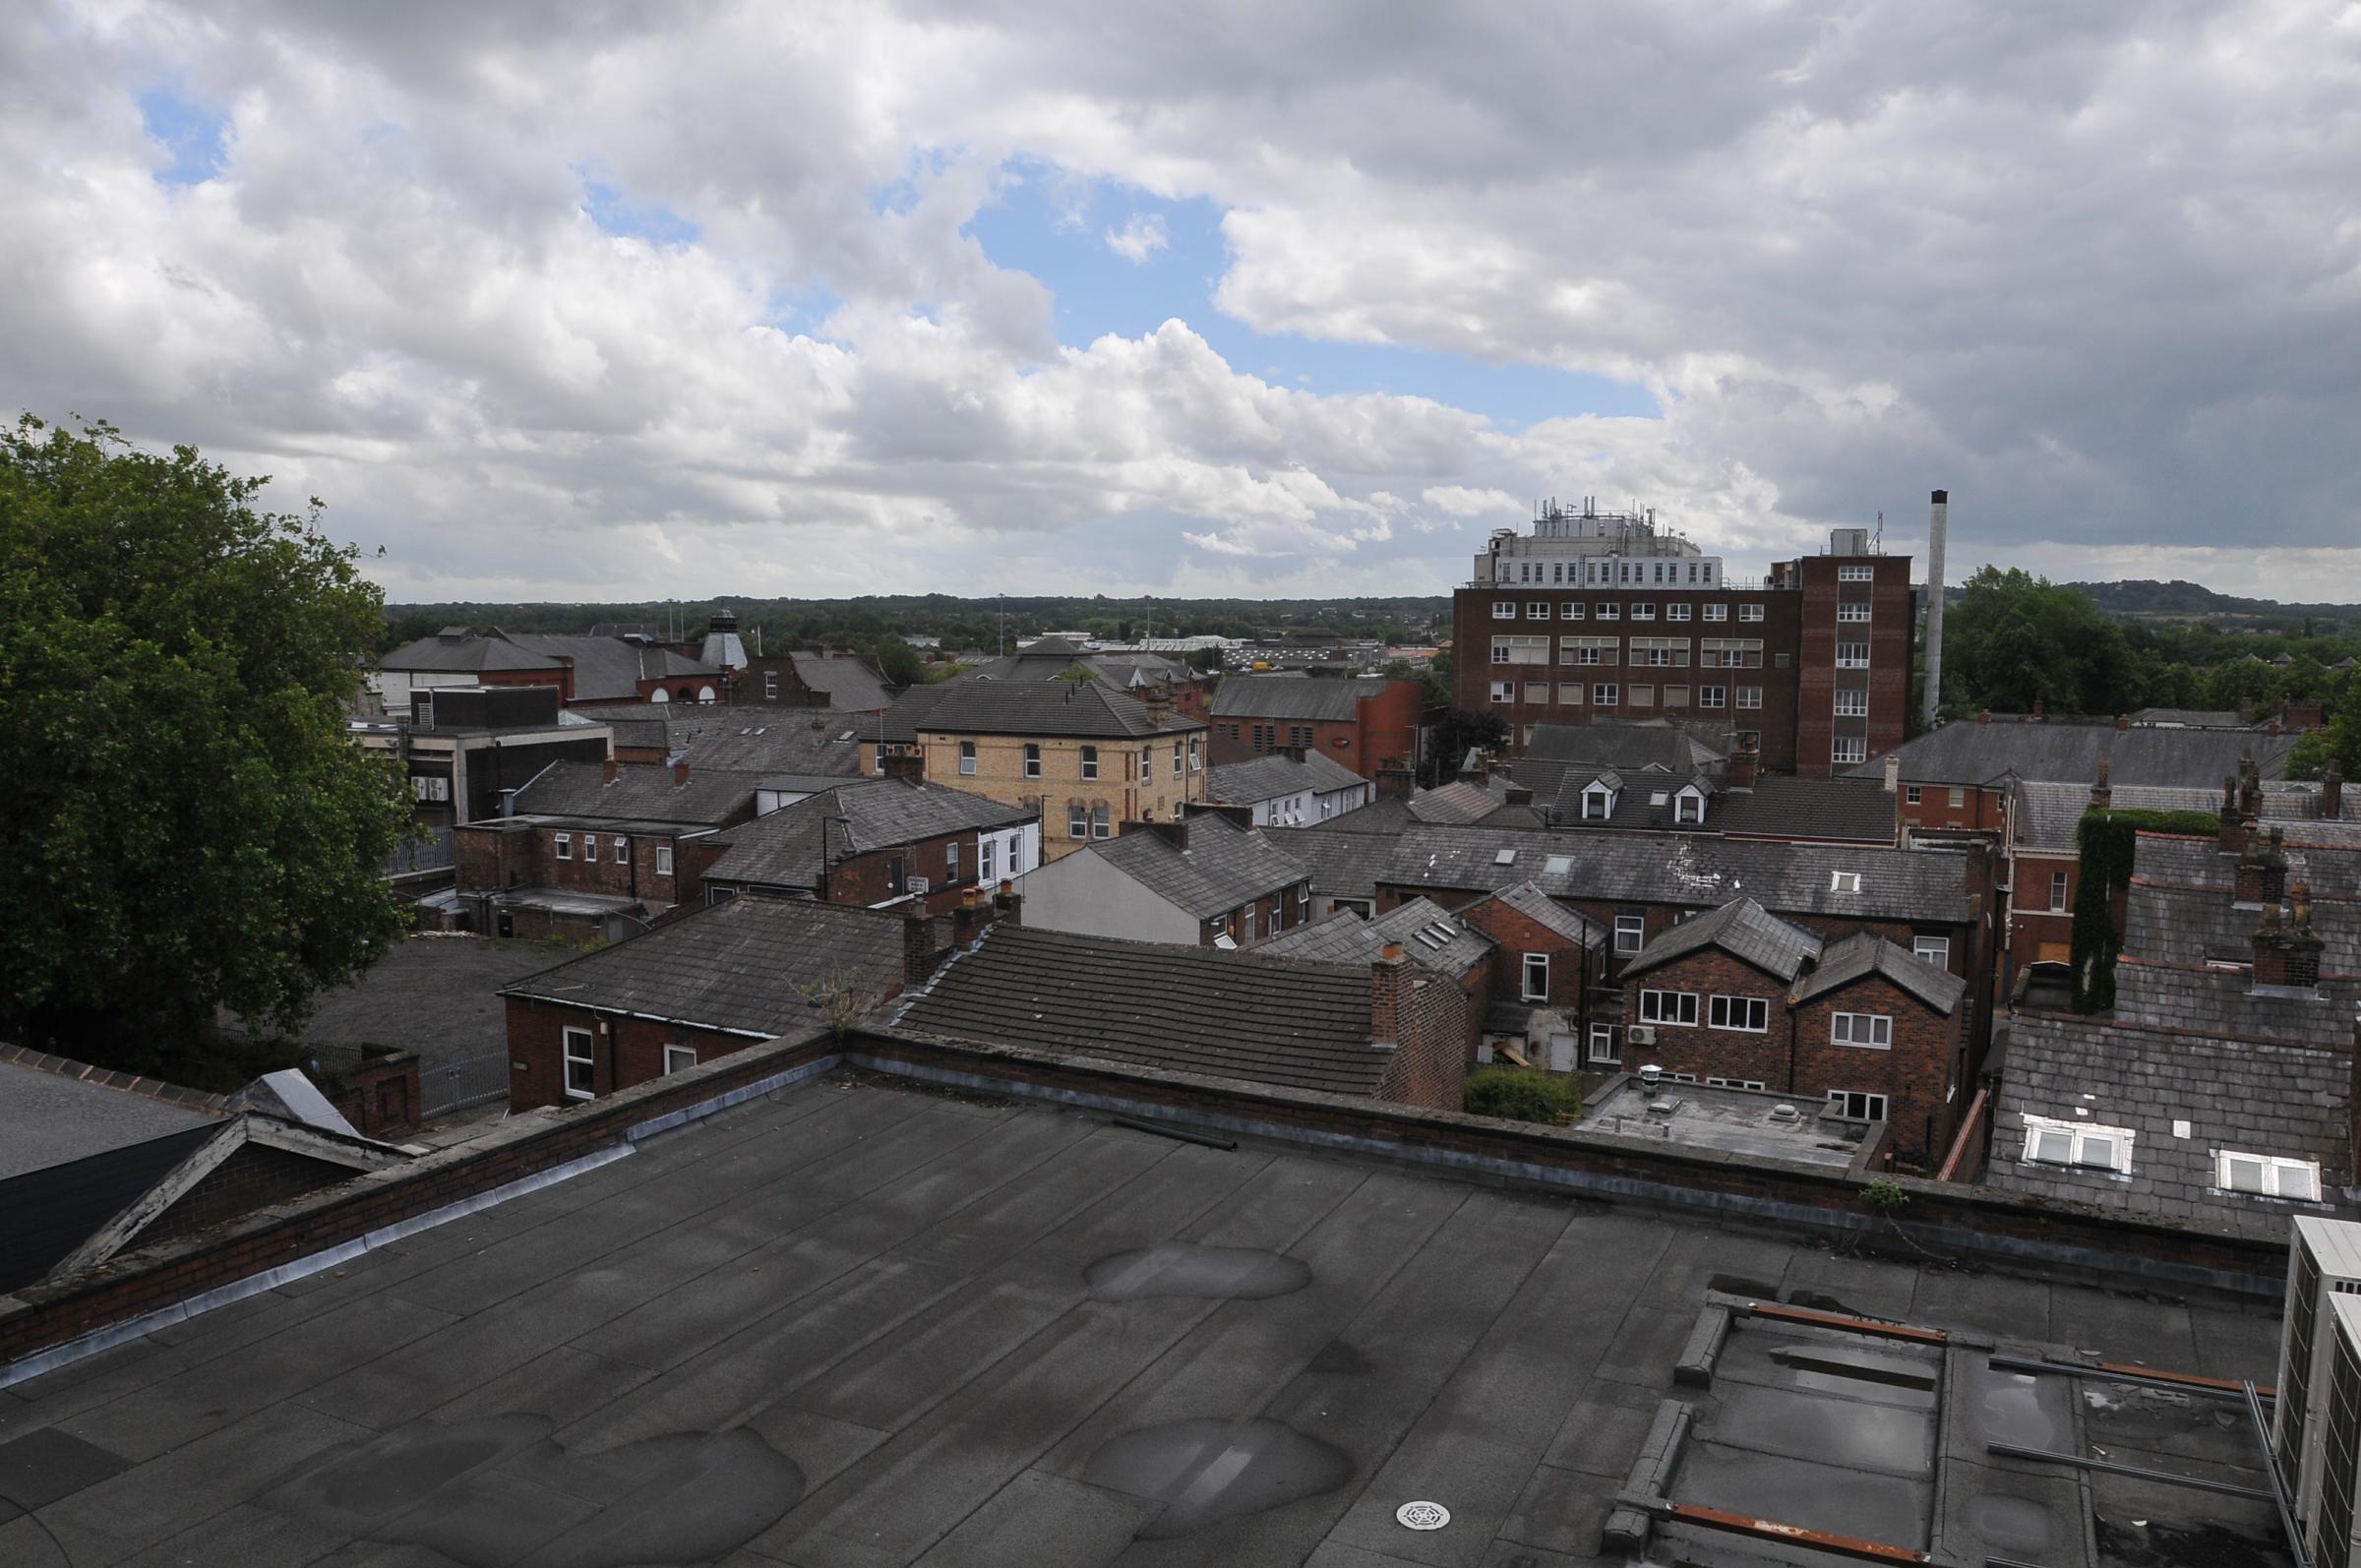 The view over Warrington from the roof which will feature an island bar